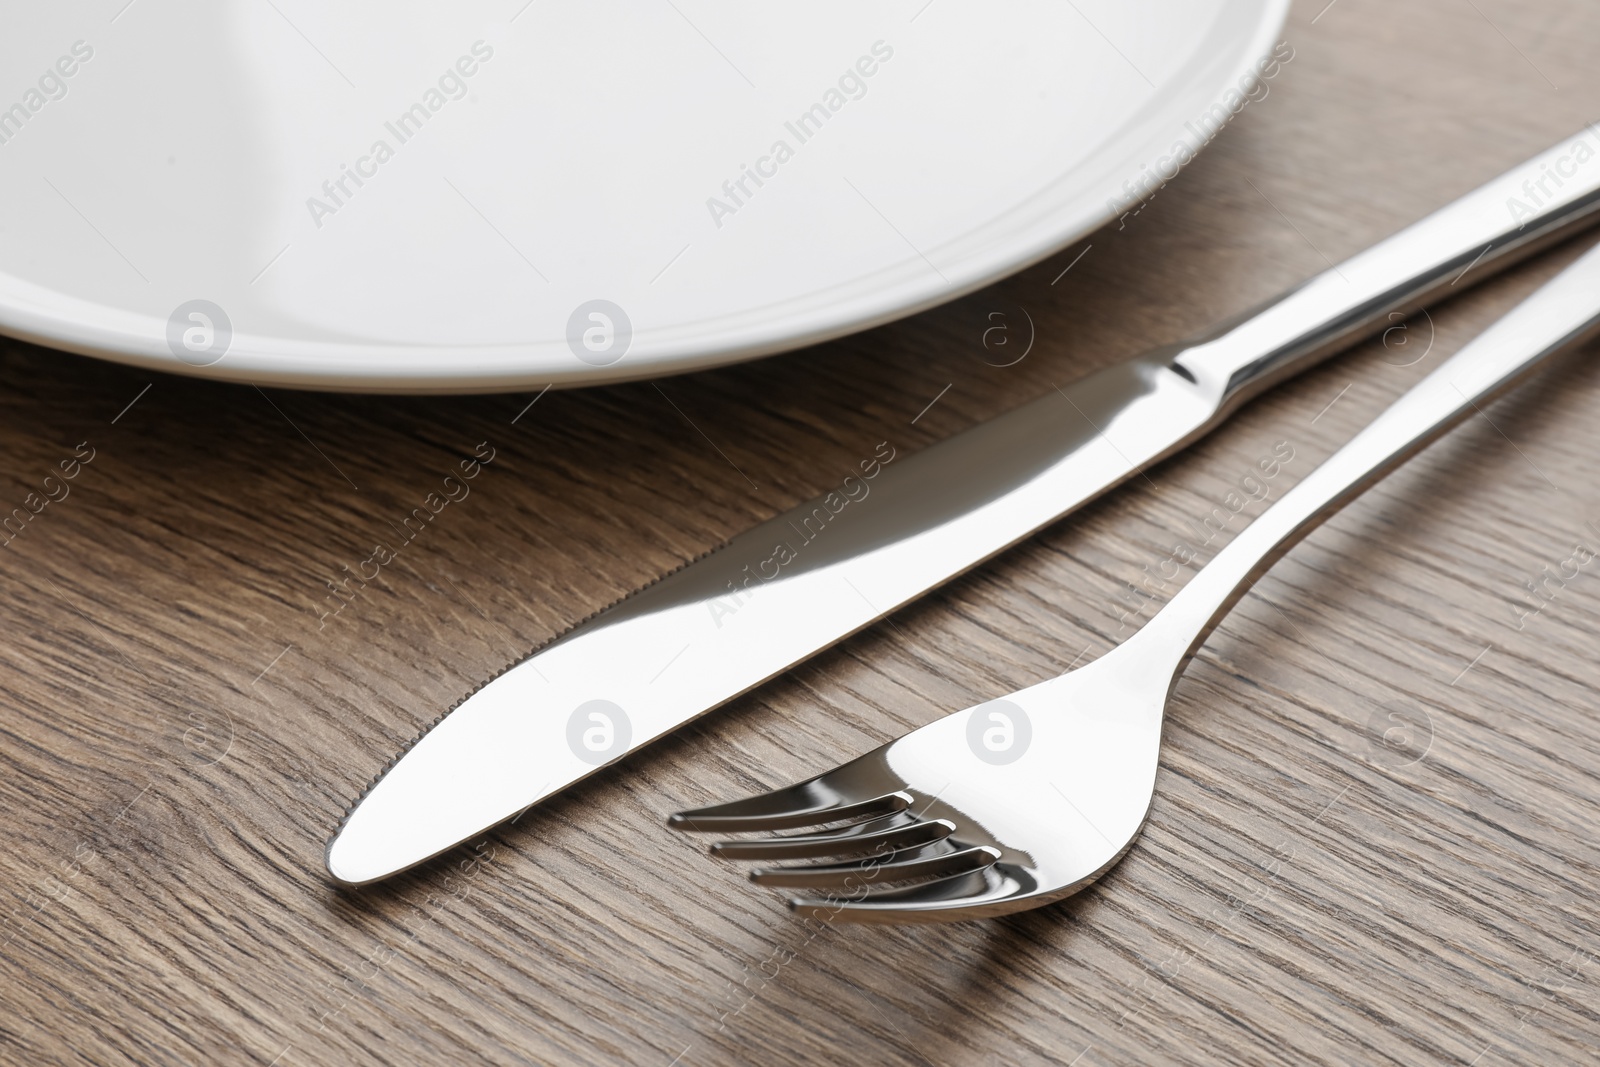 Photo of Plate, fork and knife on wooden table, closeup